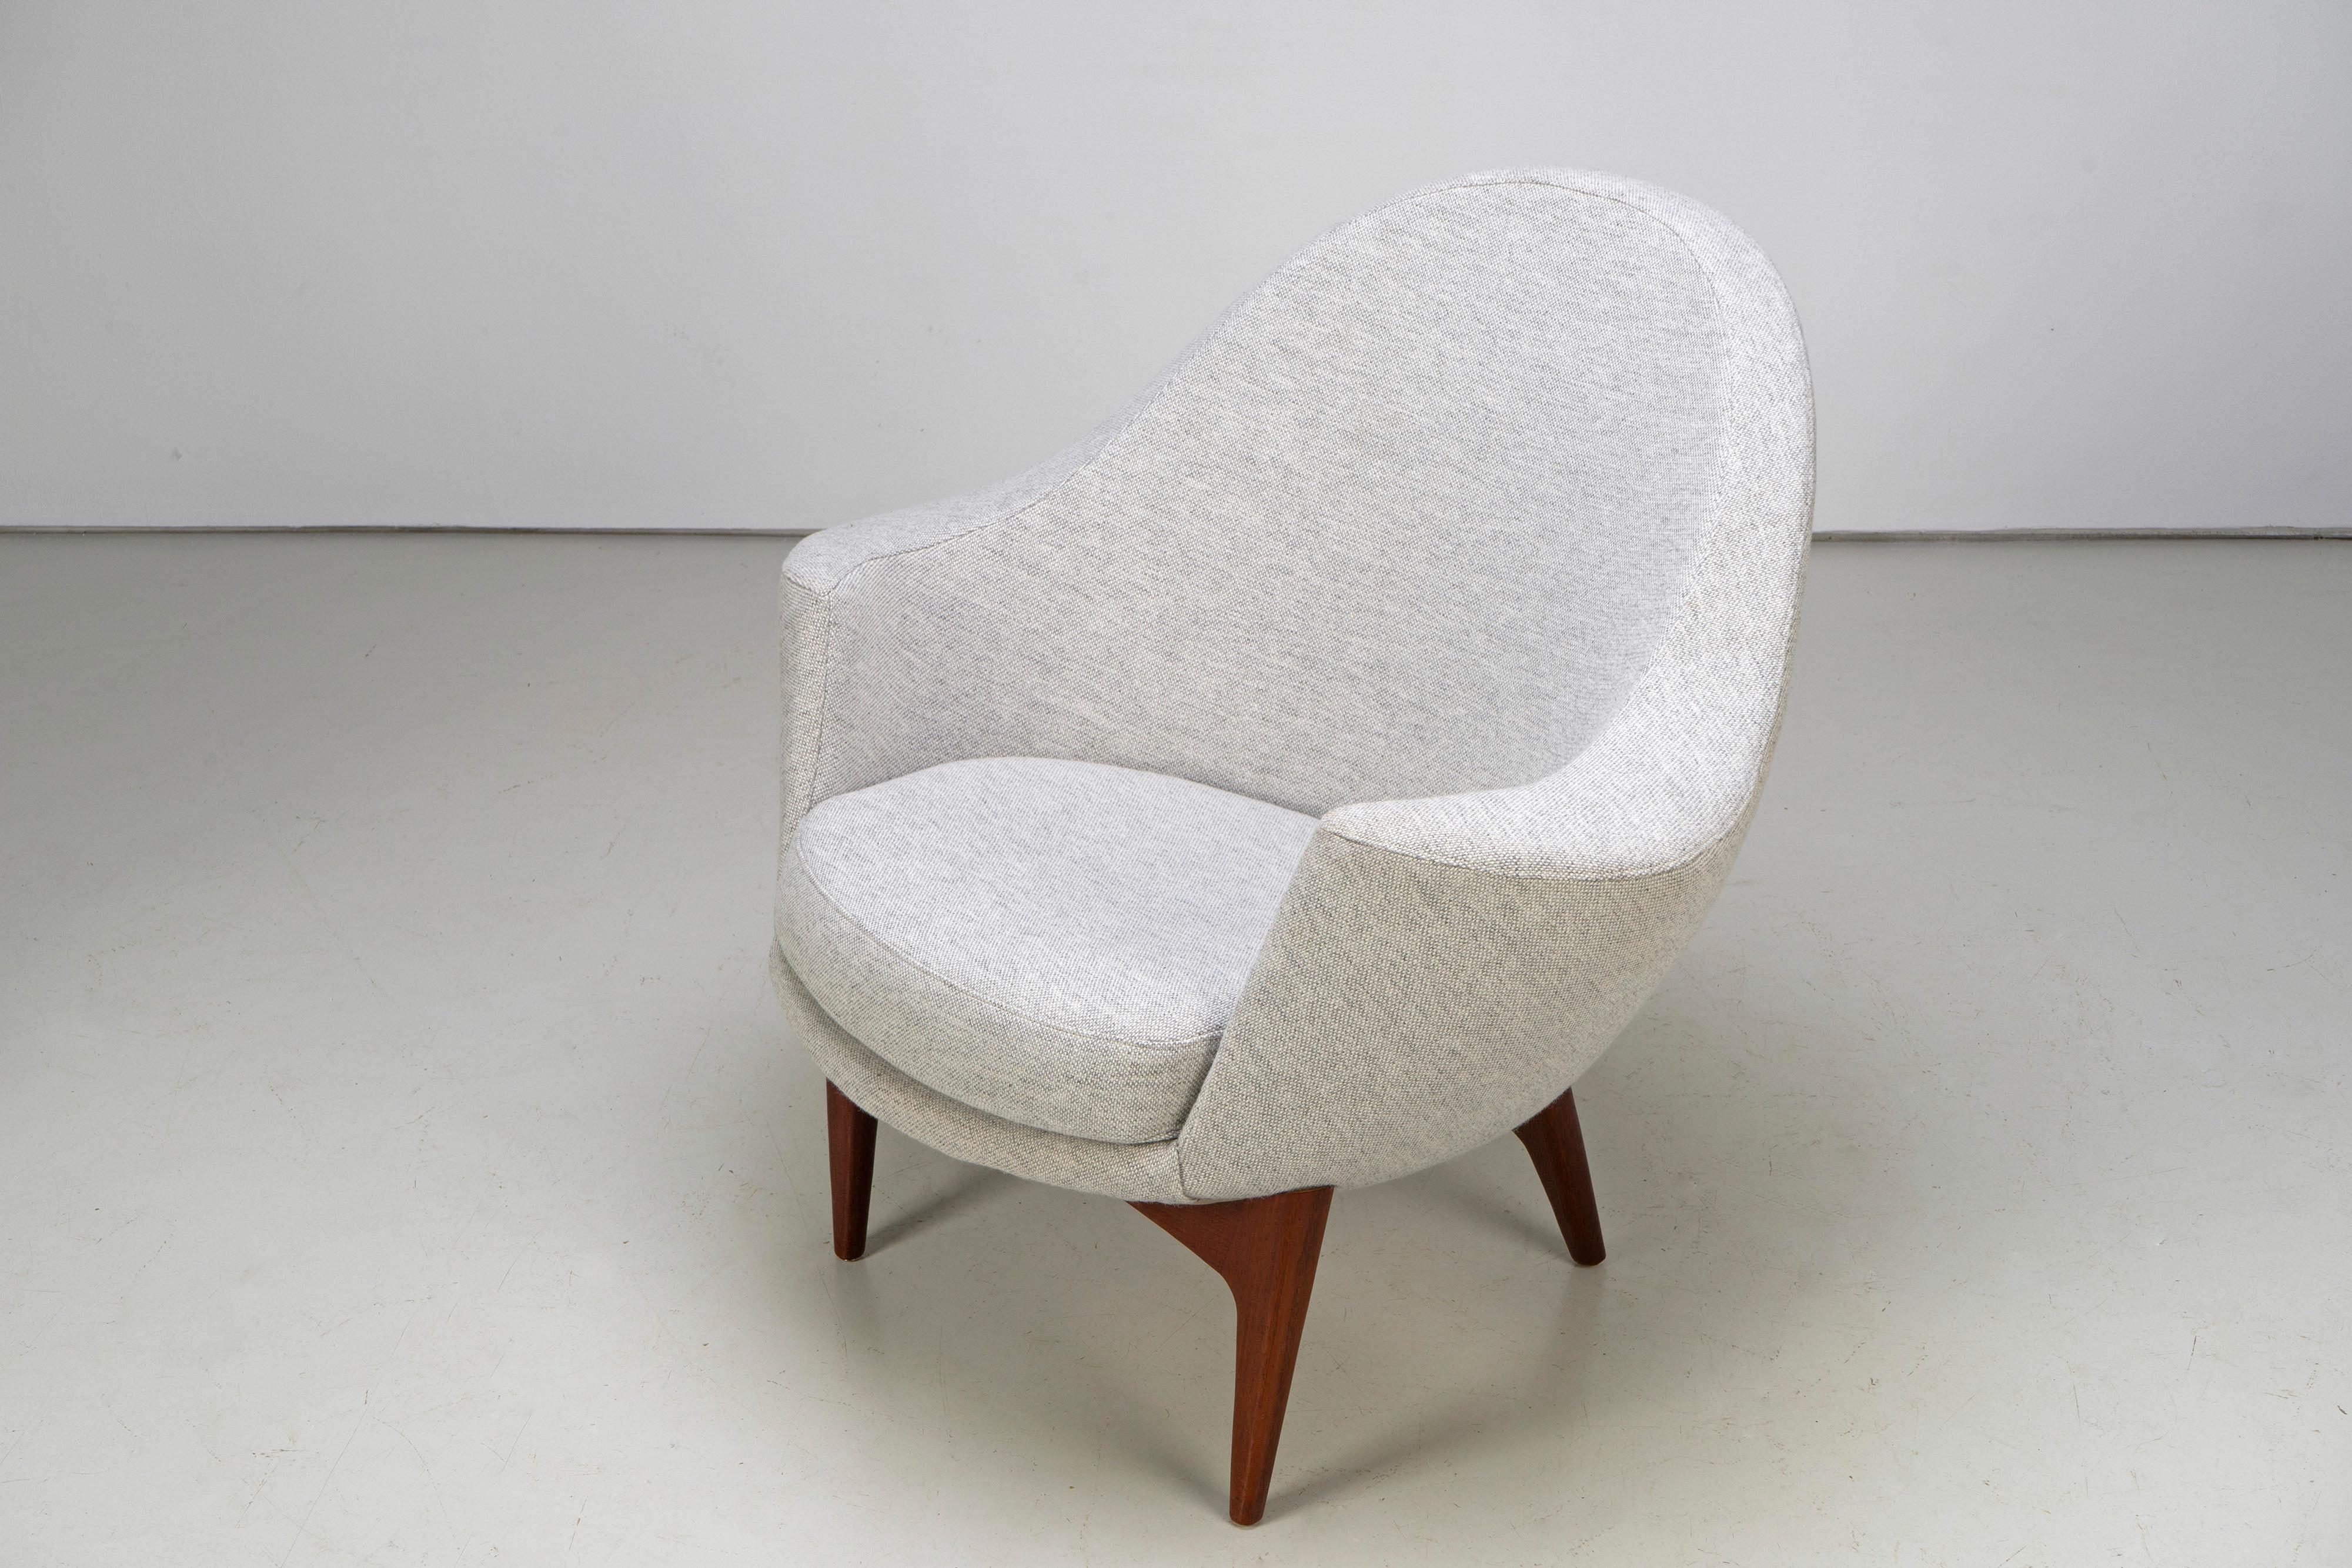 Rare Pair of Lounge Chairs by Ib Kofod Larsen for Fritz Hansen, 1959 For Sale 3